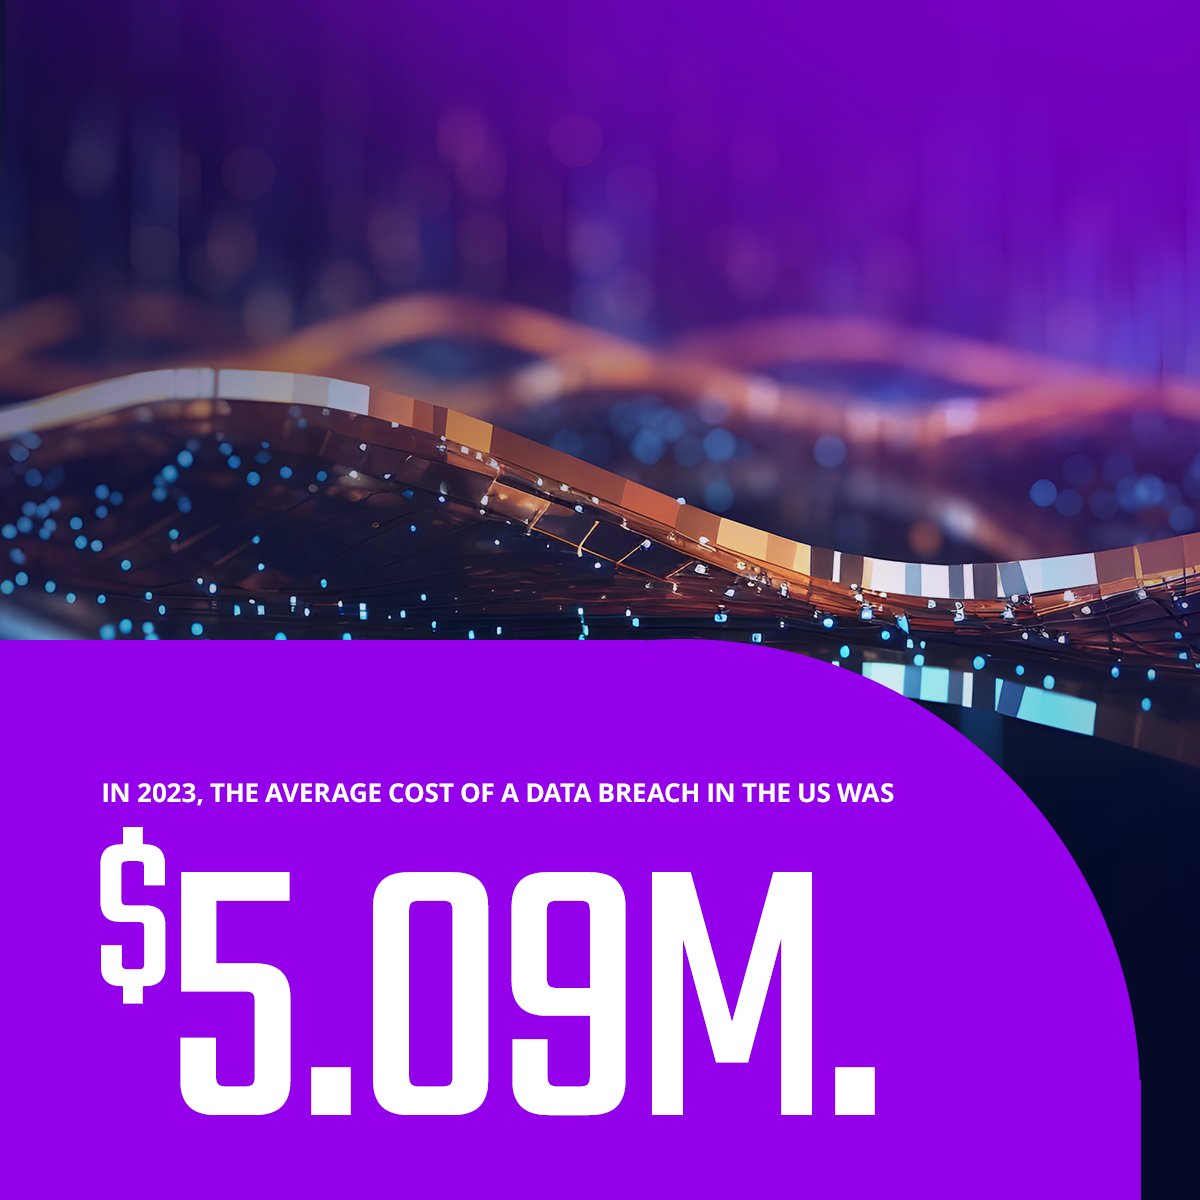 Move over, avocado toast. 🥑 🍞  It's the data breaches that are costing us. In 2023, the average cost of a data breach in the US was $5.09M. 

Source: ibm.co/3CP4l2q